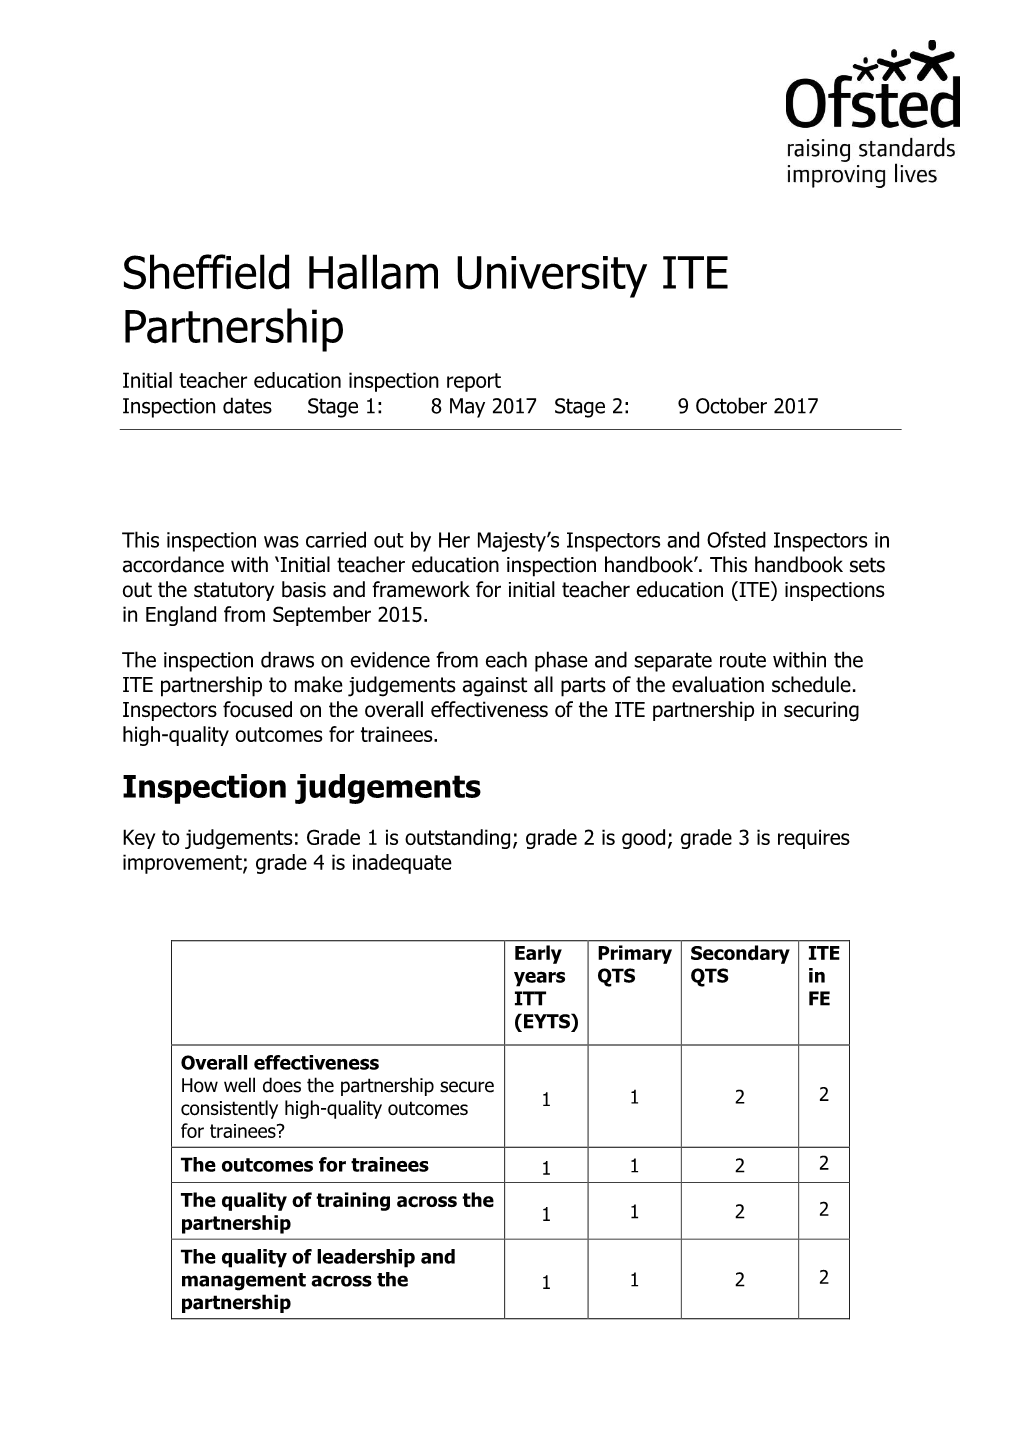 Sheffield Hallam University ITE Partnership Initial Teacher Education Inspection Report Inspection Dates Stage 1: 8 May 2017 Stage 2: 9 October 2017